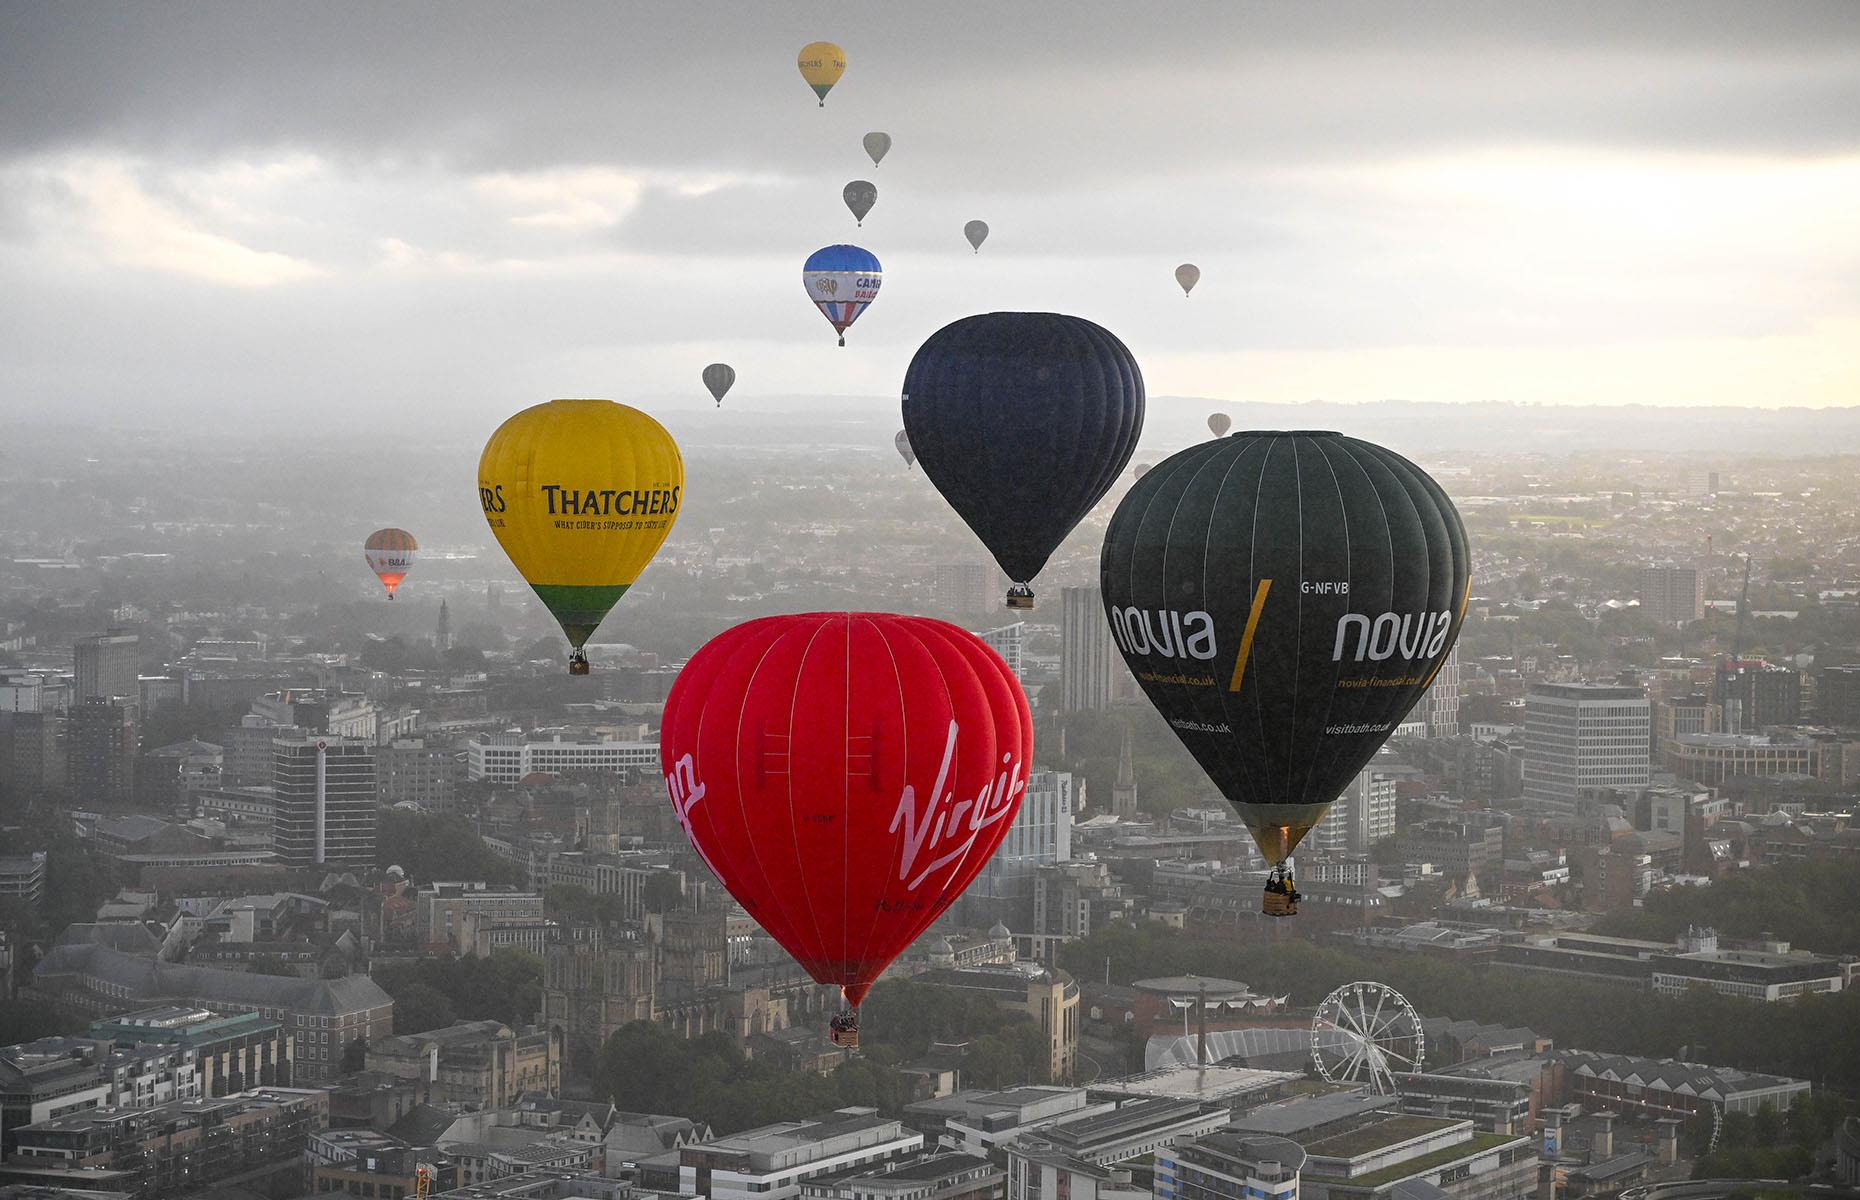 <p>Europe's largest hot air balloon event sees more than 130 of these inflatables take to the skies over Bristol – pictured here is 2023's ascent, celebrating 45 years of the festival. Launching at dusk and dawn from Ashton Court Estate's beautiful grounds, the balloons glide over the city and the famous Clifton Suspension Bridge. The free event is an incredible spectacle and attracts hundreds of thousands of spectators each year, but if you want to take to the skies in a balloon, you'll have to pay handsomely.</p>  <p><strong><a href="https://www.loveexploring.com/galleries/81954/54-of-the-worlds-most-incredible-photos-from-above?page=1">Now discover 54 of the world's most incredible photos taken from above</a></strong></p>